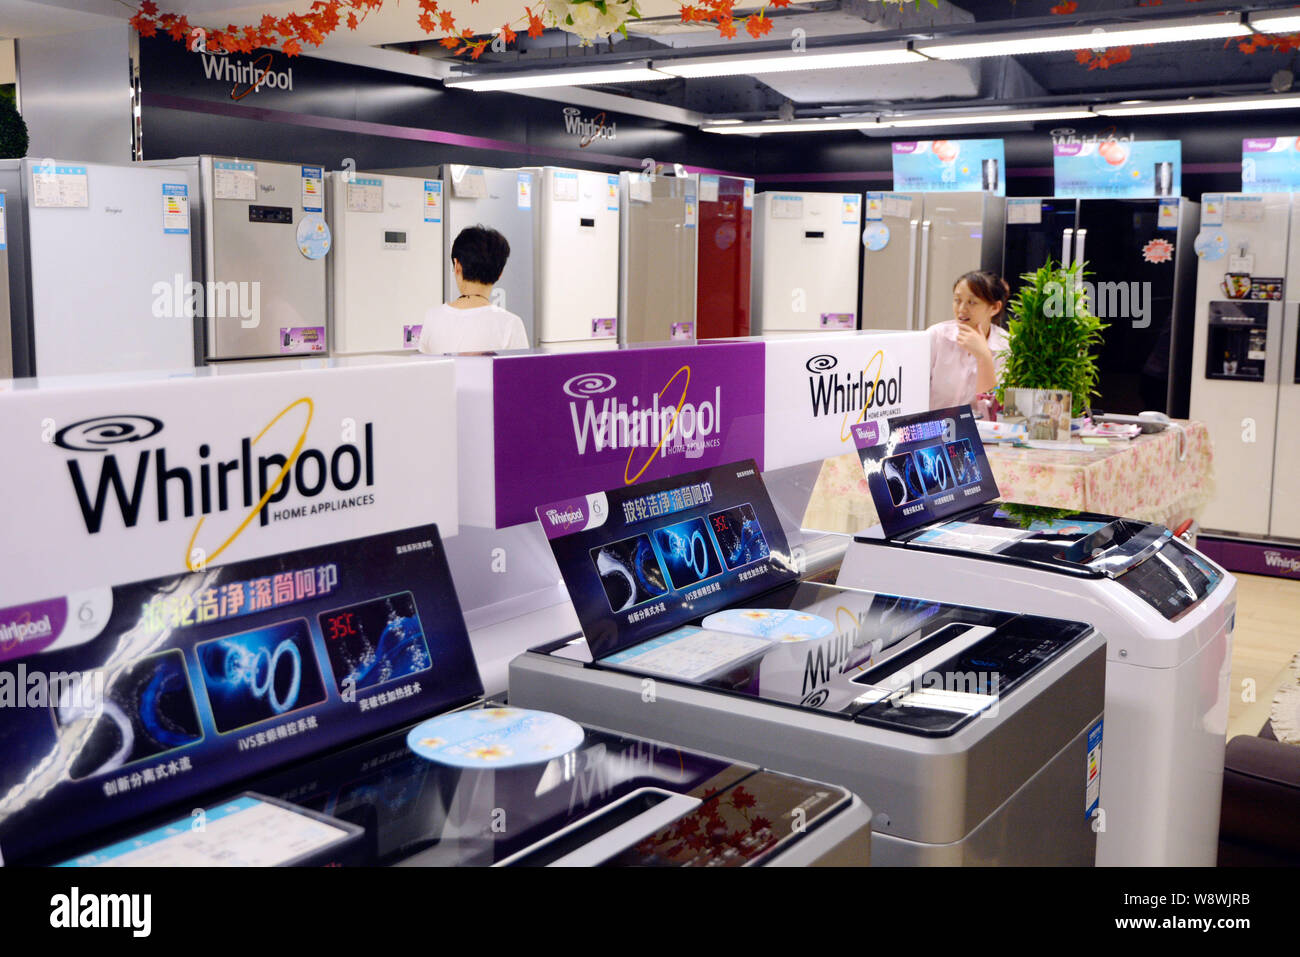 --FILE--A customer looks at Whirlpool refrigerators at a home appliances store in Dalian city, northeast Chinas Liaoning province, 4 August 2013.   Wh Stock Photo